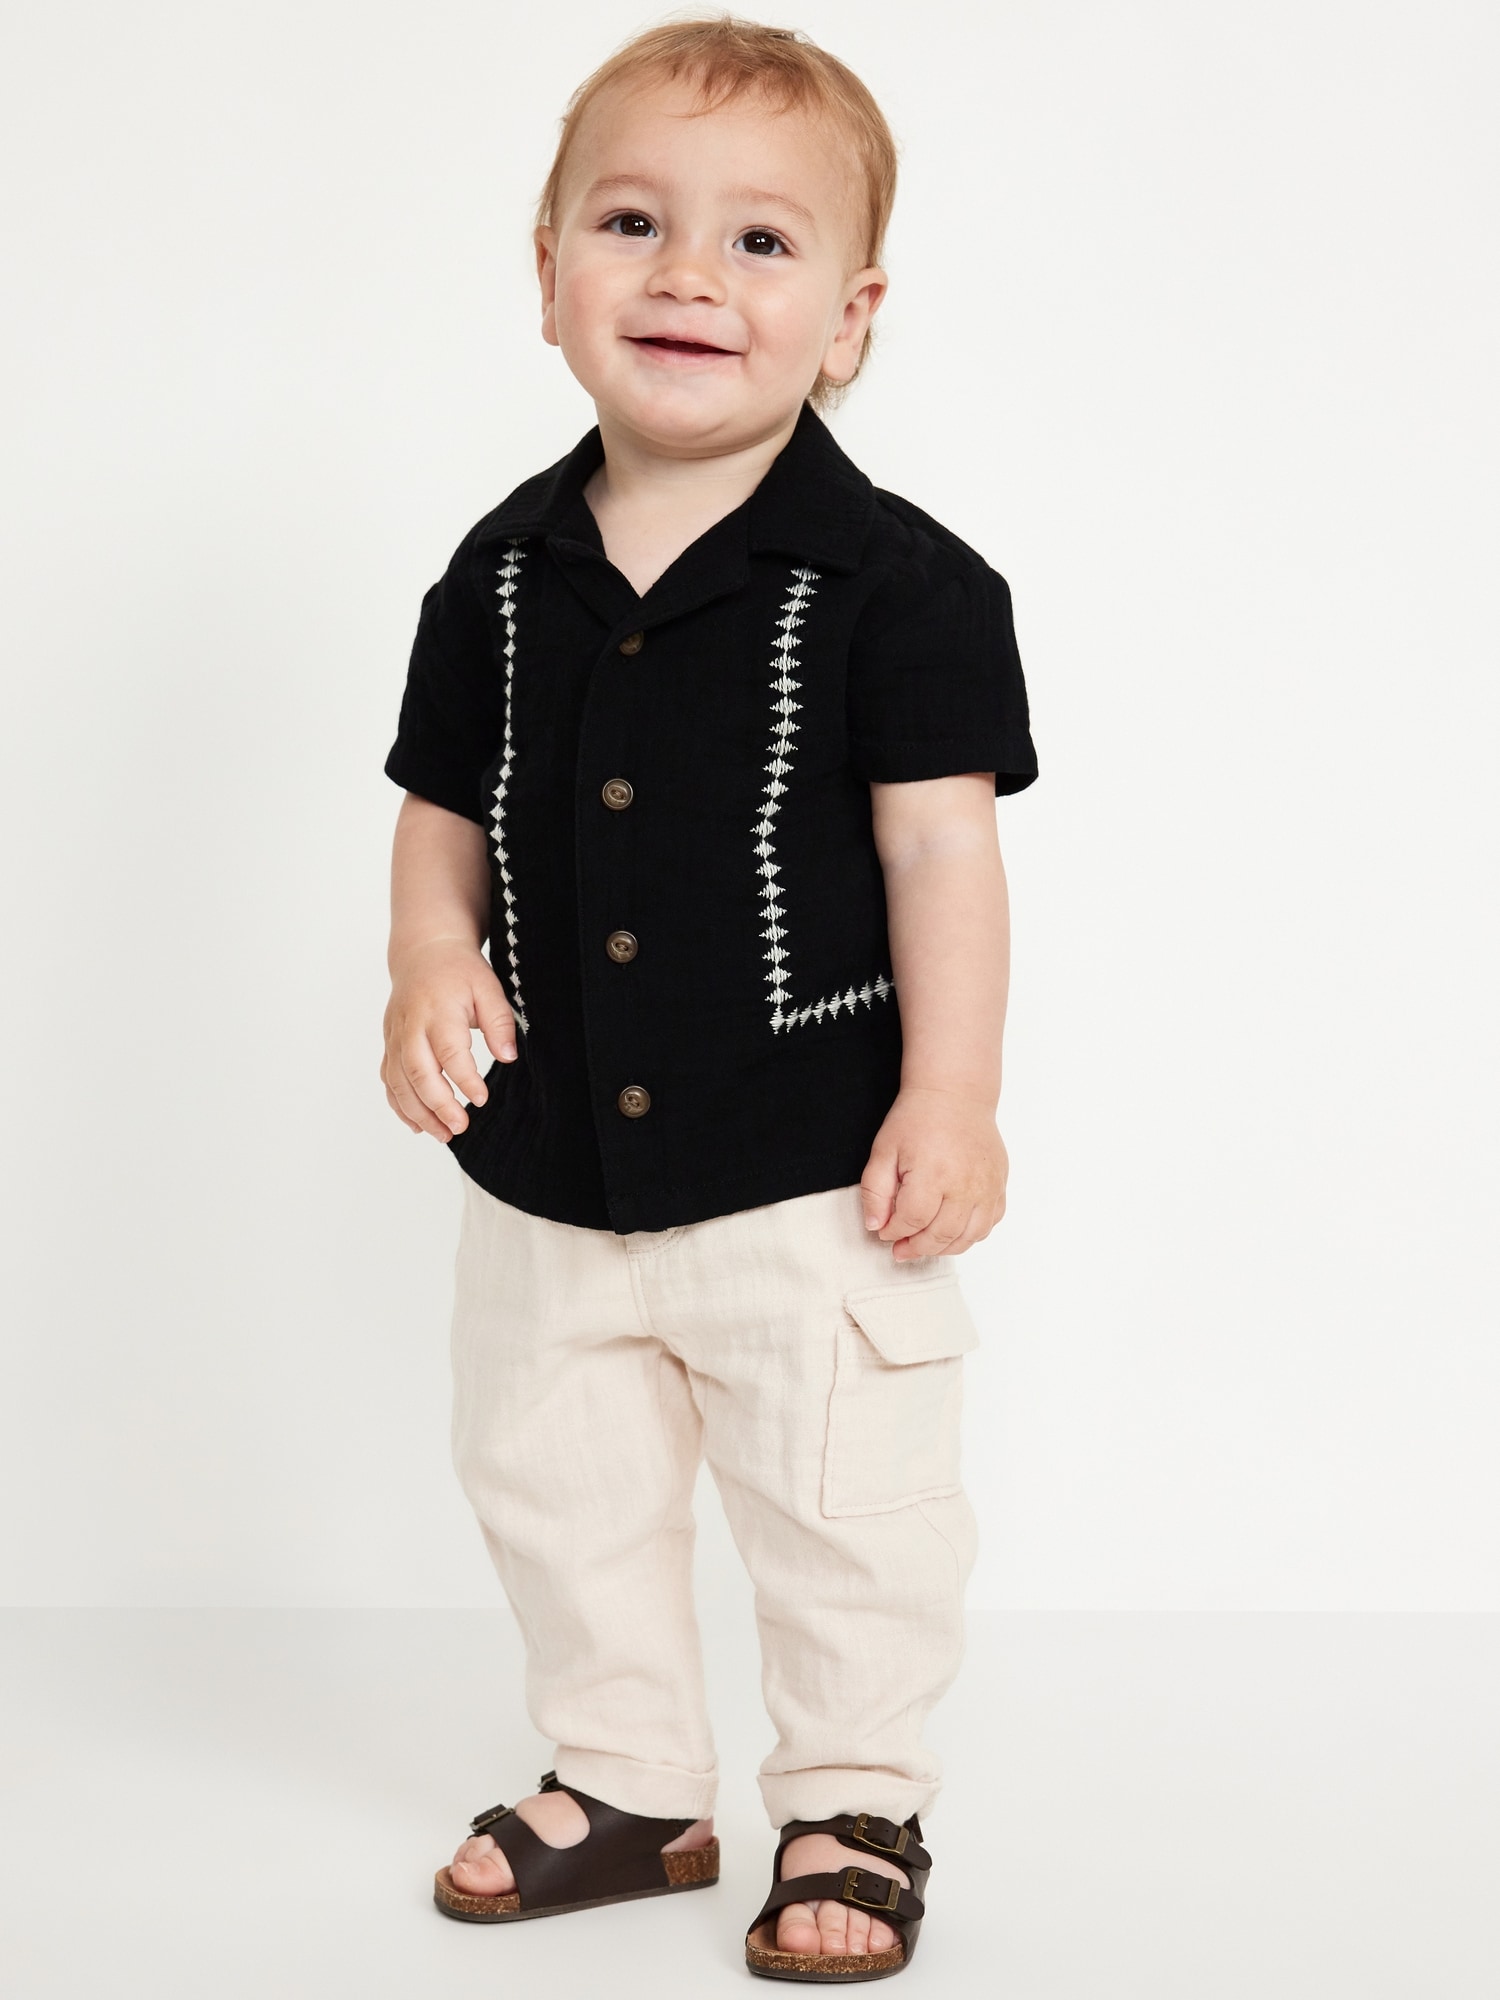 Double-Weave Utility Cargo Pants for Baby